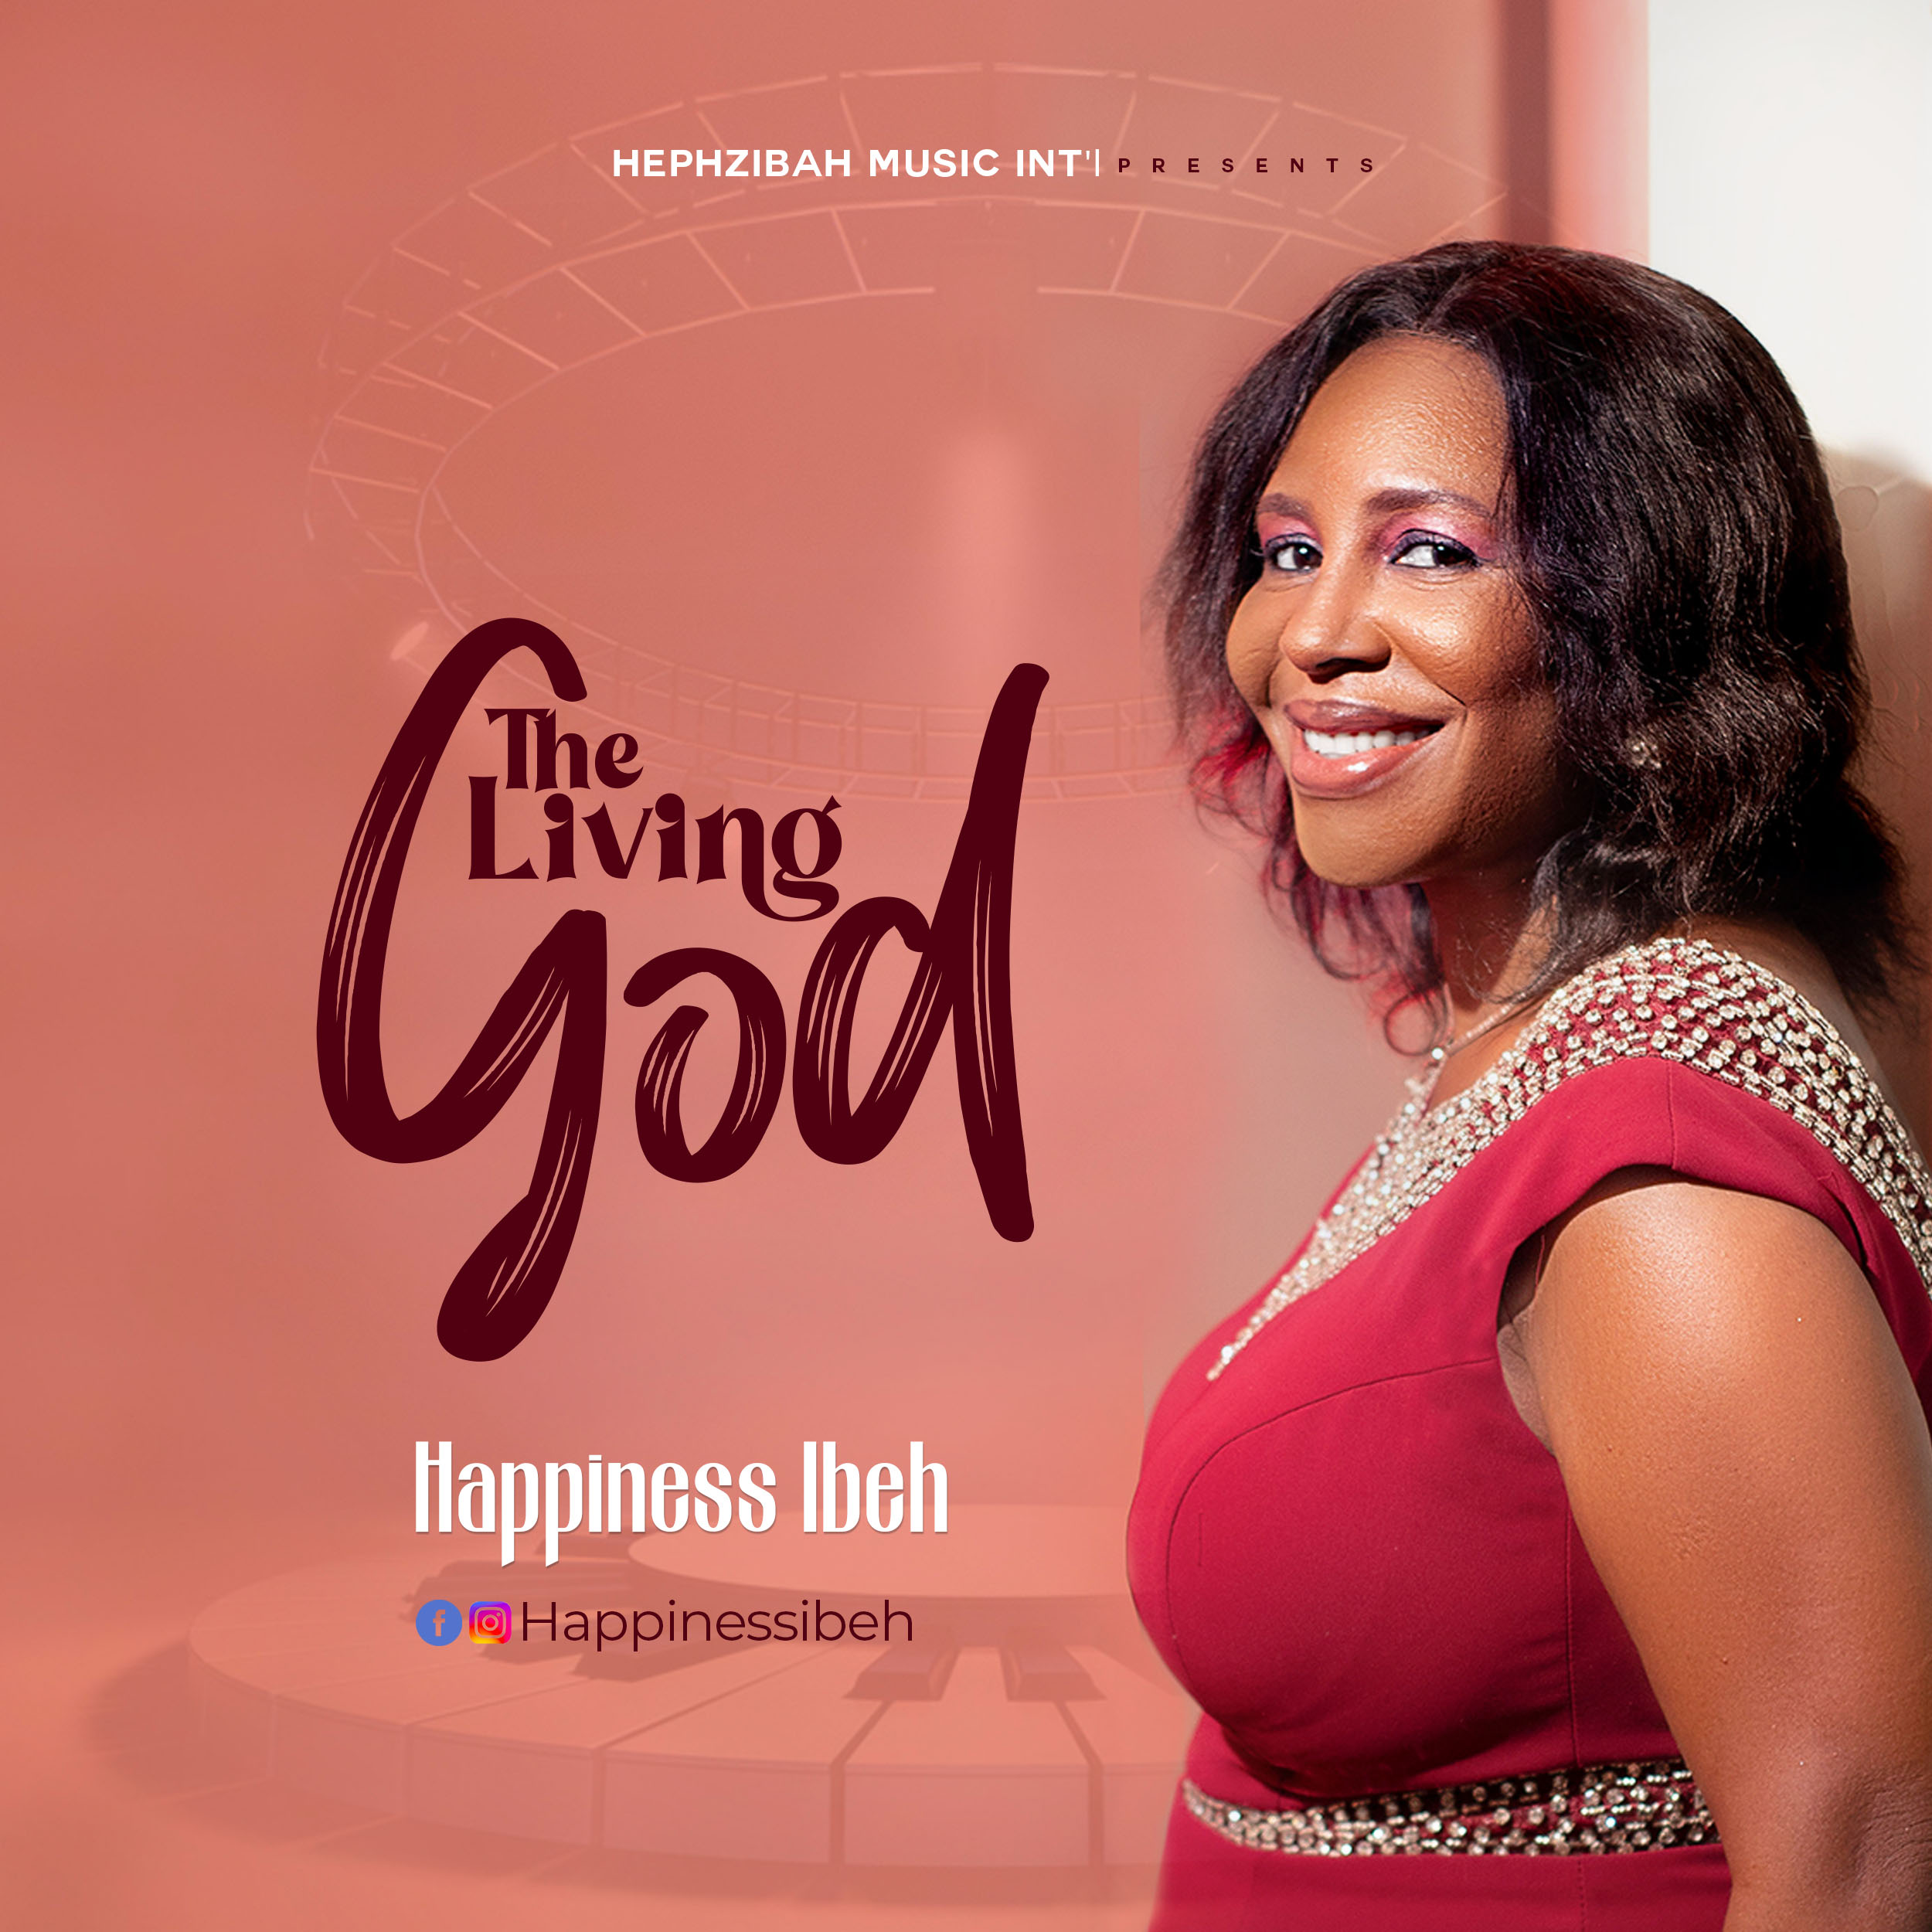 DOWNLOAD MP3 : Happiness Ibeh - The Living God